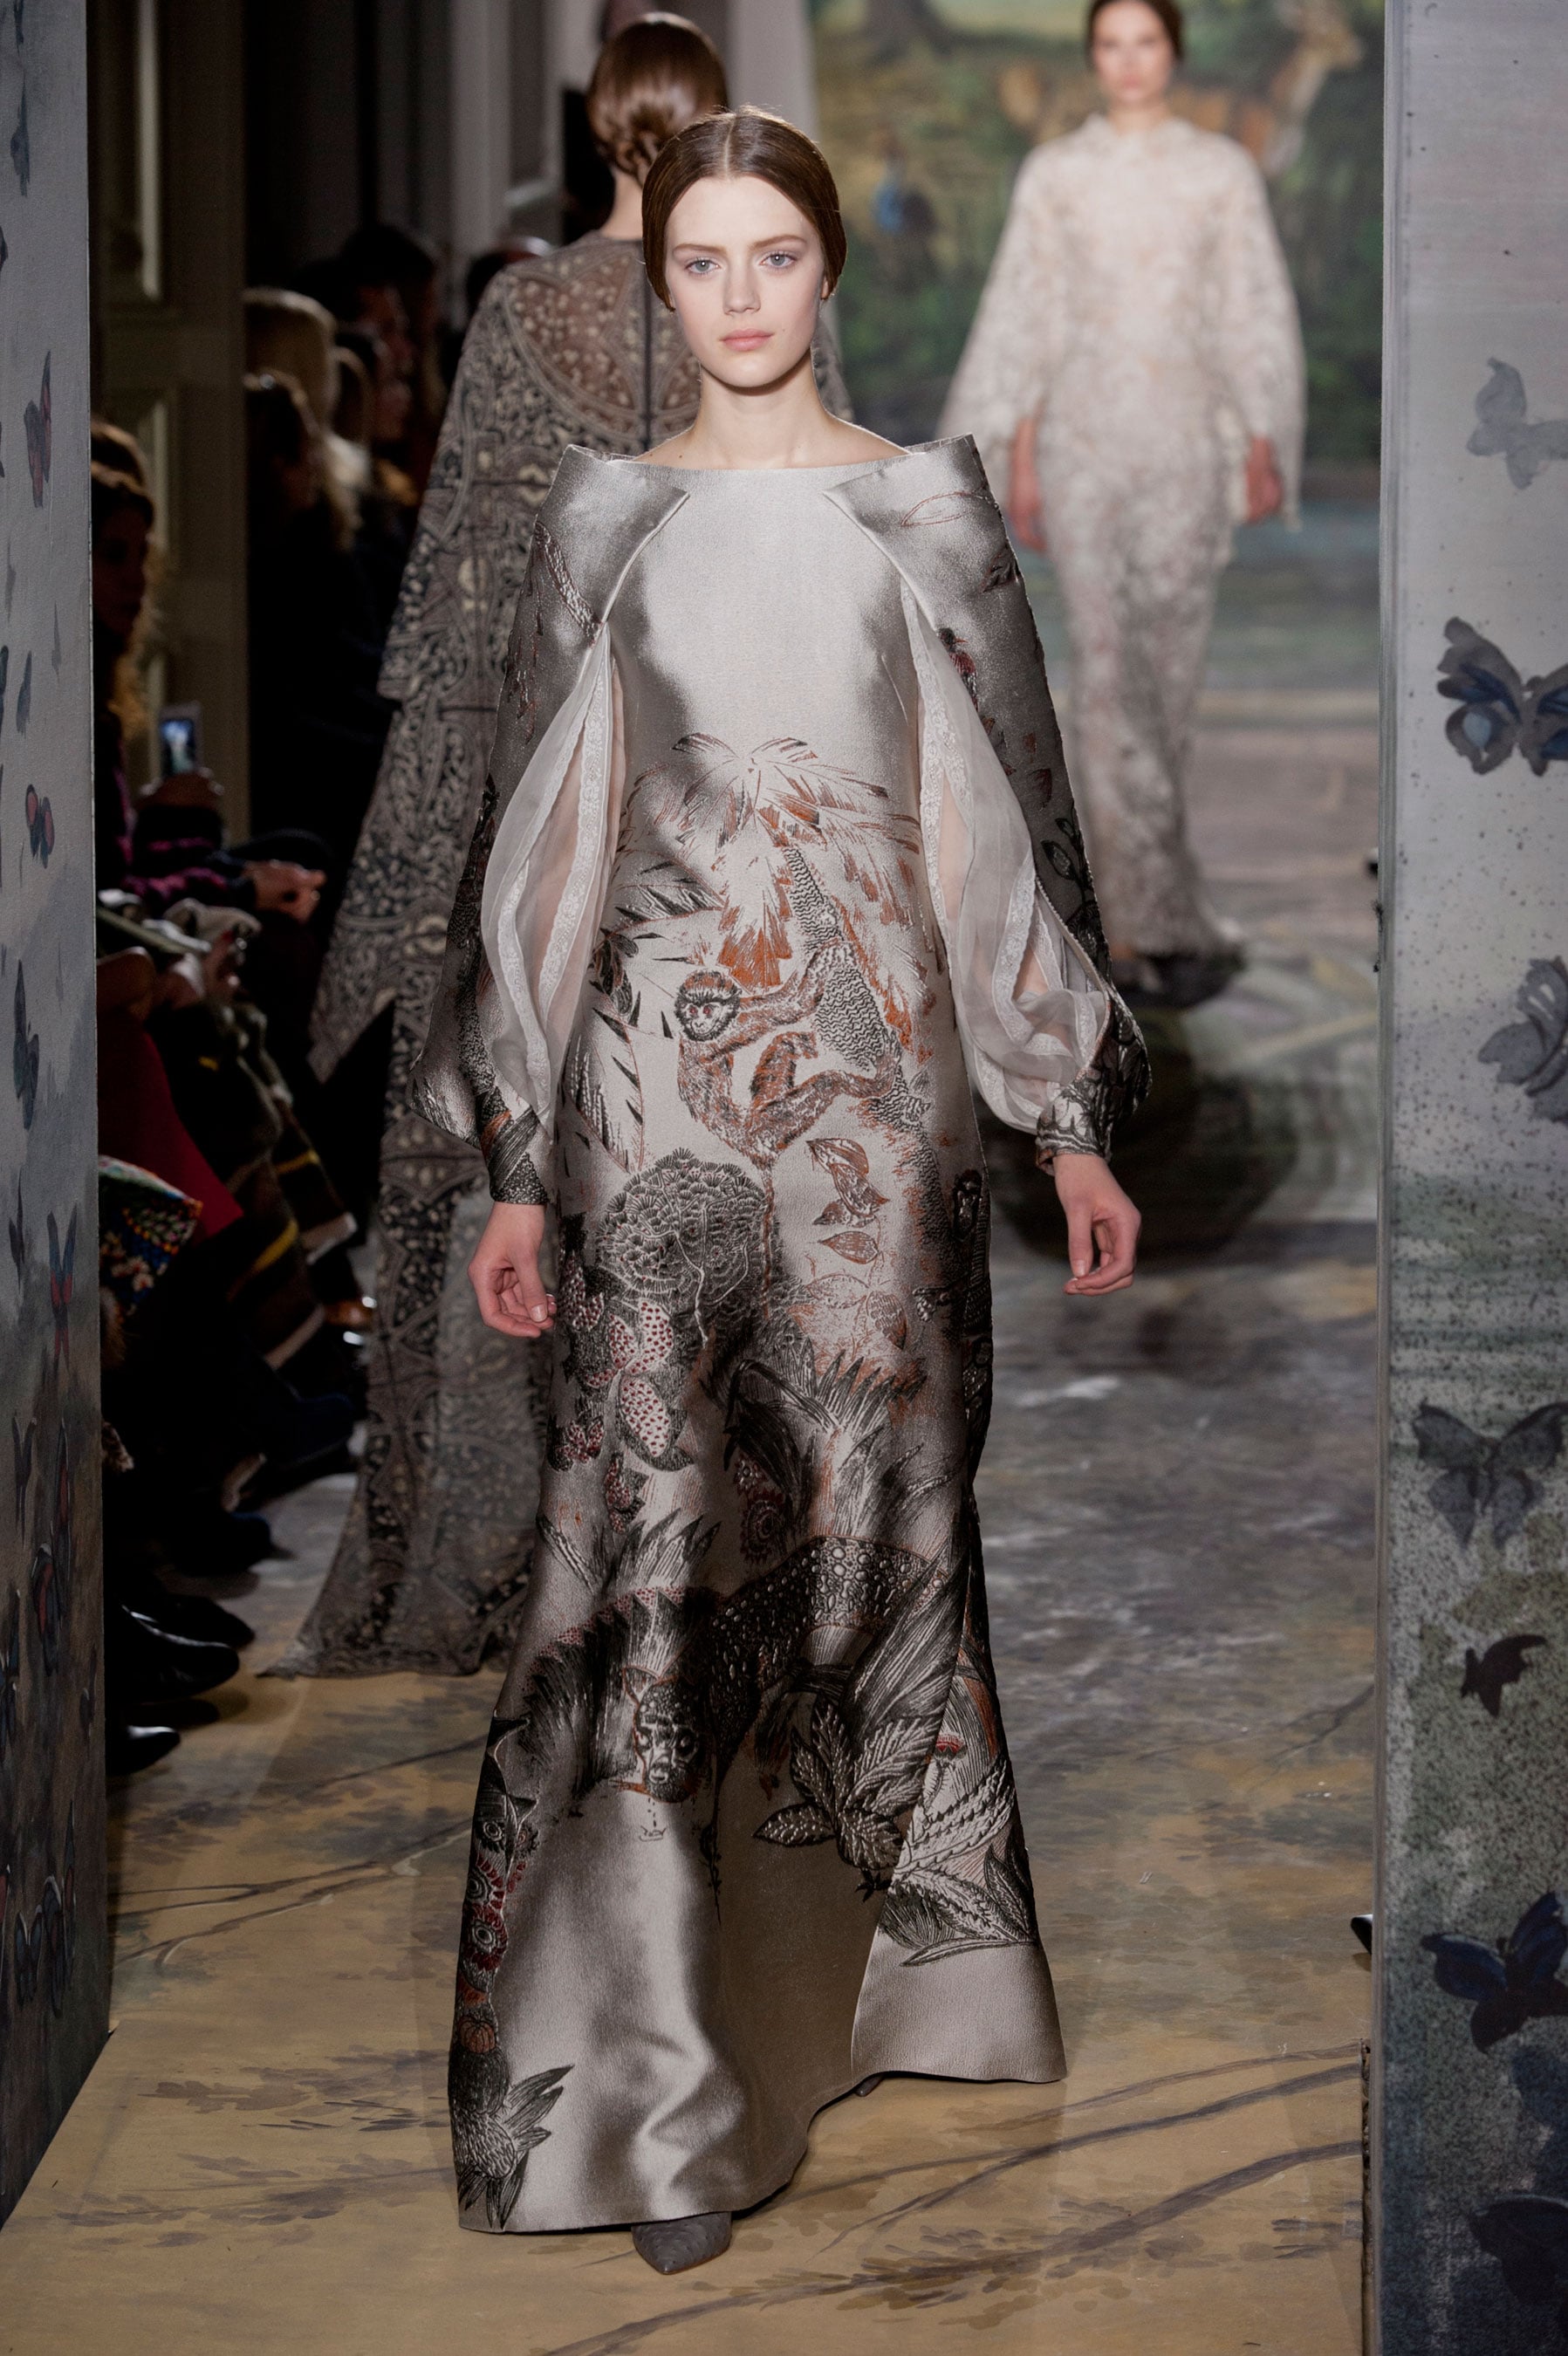 Valentino Couture Spring 2014 | Valentino Haute Couture Gives Us a Whole Other Kind of Swan Song | POPSUGAR Fashion Photo 45